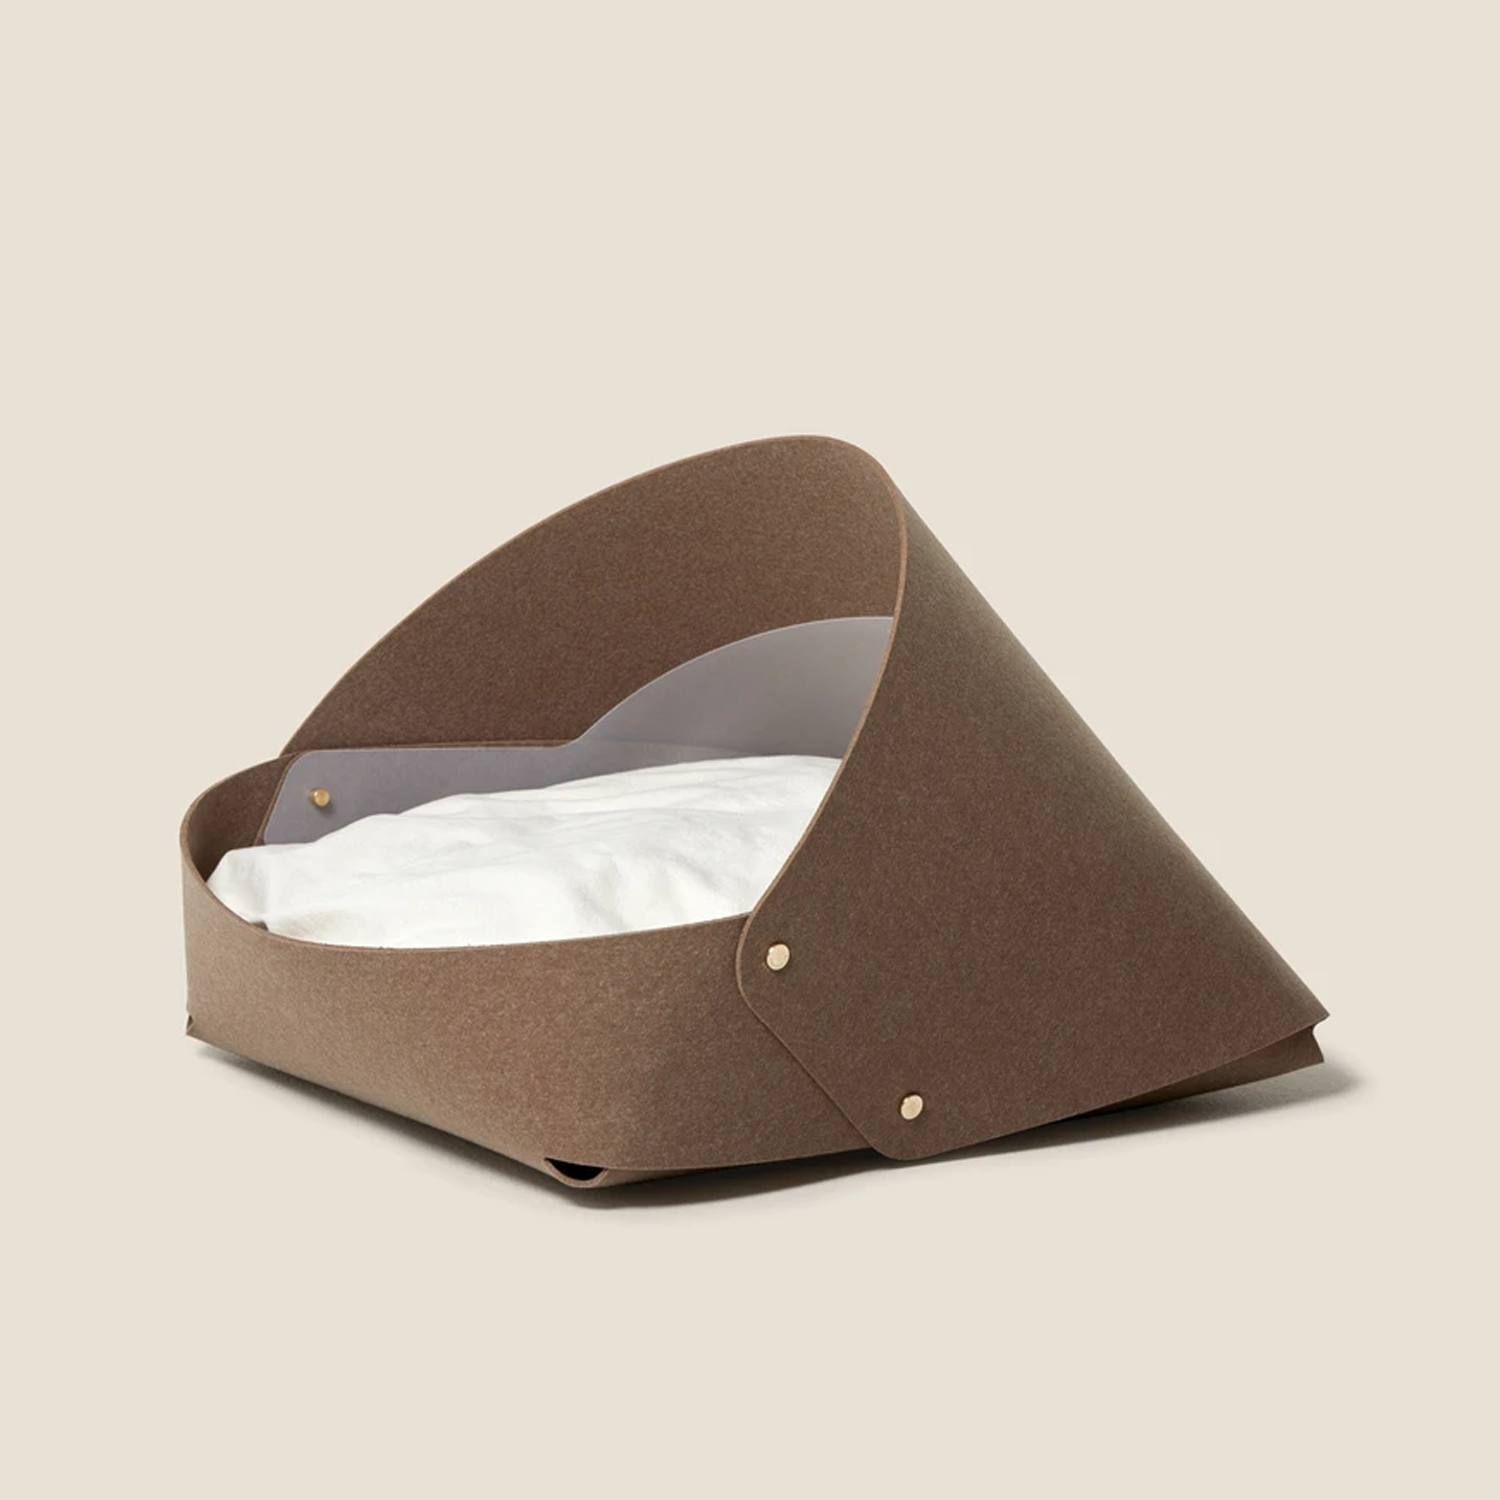 Pet Boutique - Dog Beds - Brown Marron Dog Bed by Pets So Good